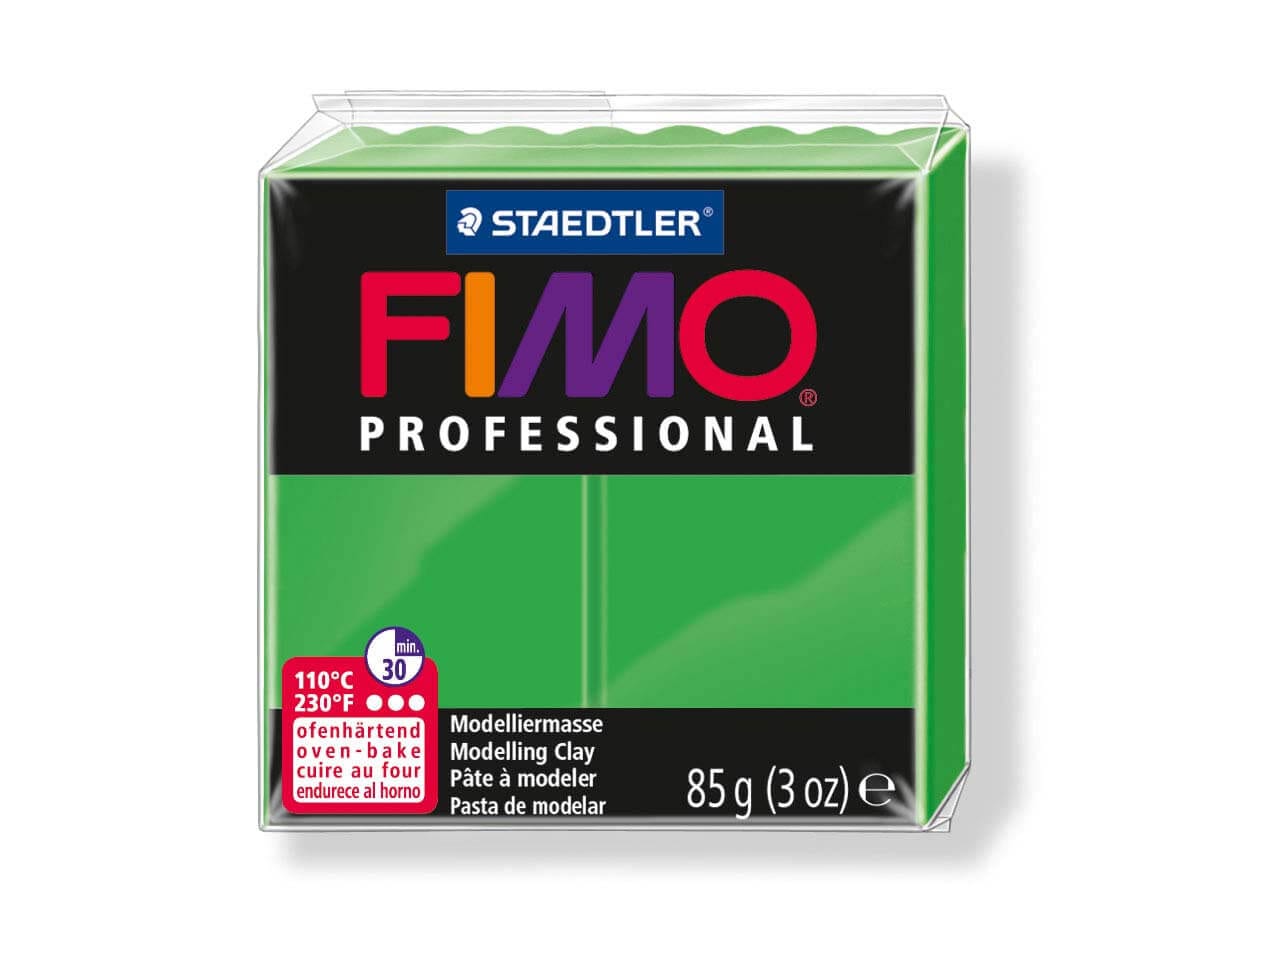 Staedtler-Mars - Modelling Clay Fimo Professional - Sapgreen (4520955150423)